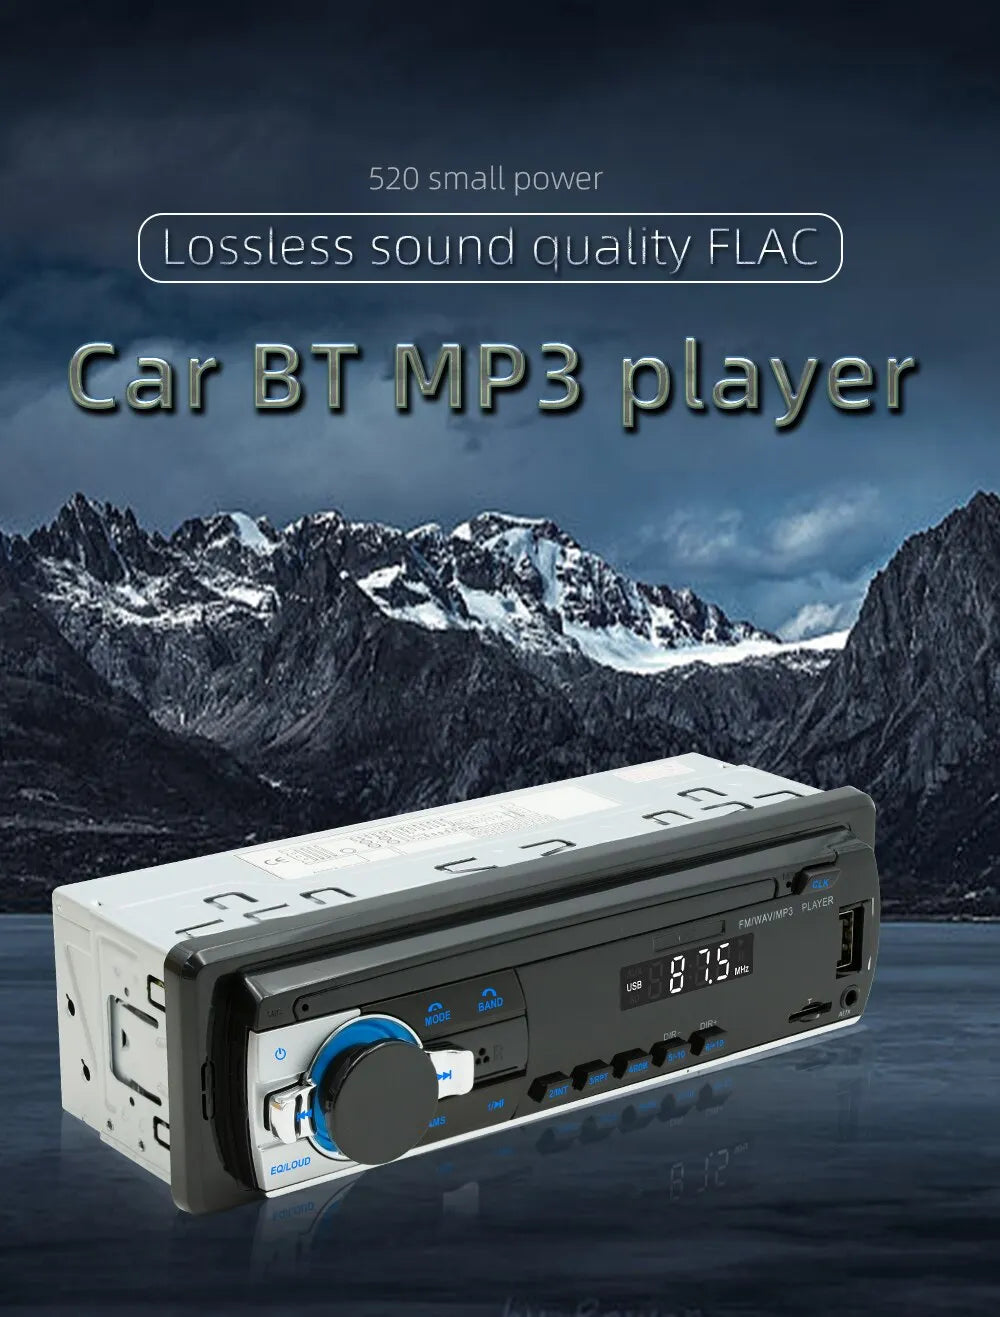 Car Radio Stereo Player Digital Bluetooth MP3 Player JSD-520 60Wx4 FM Audio Stereo Music USB/SD with In Dash AUX Input